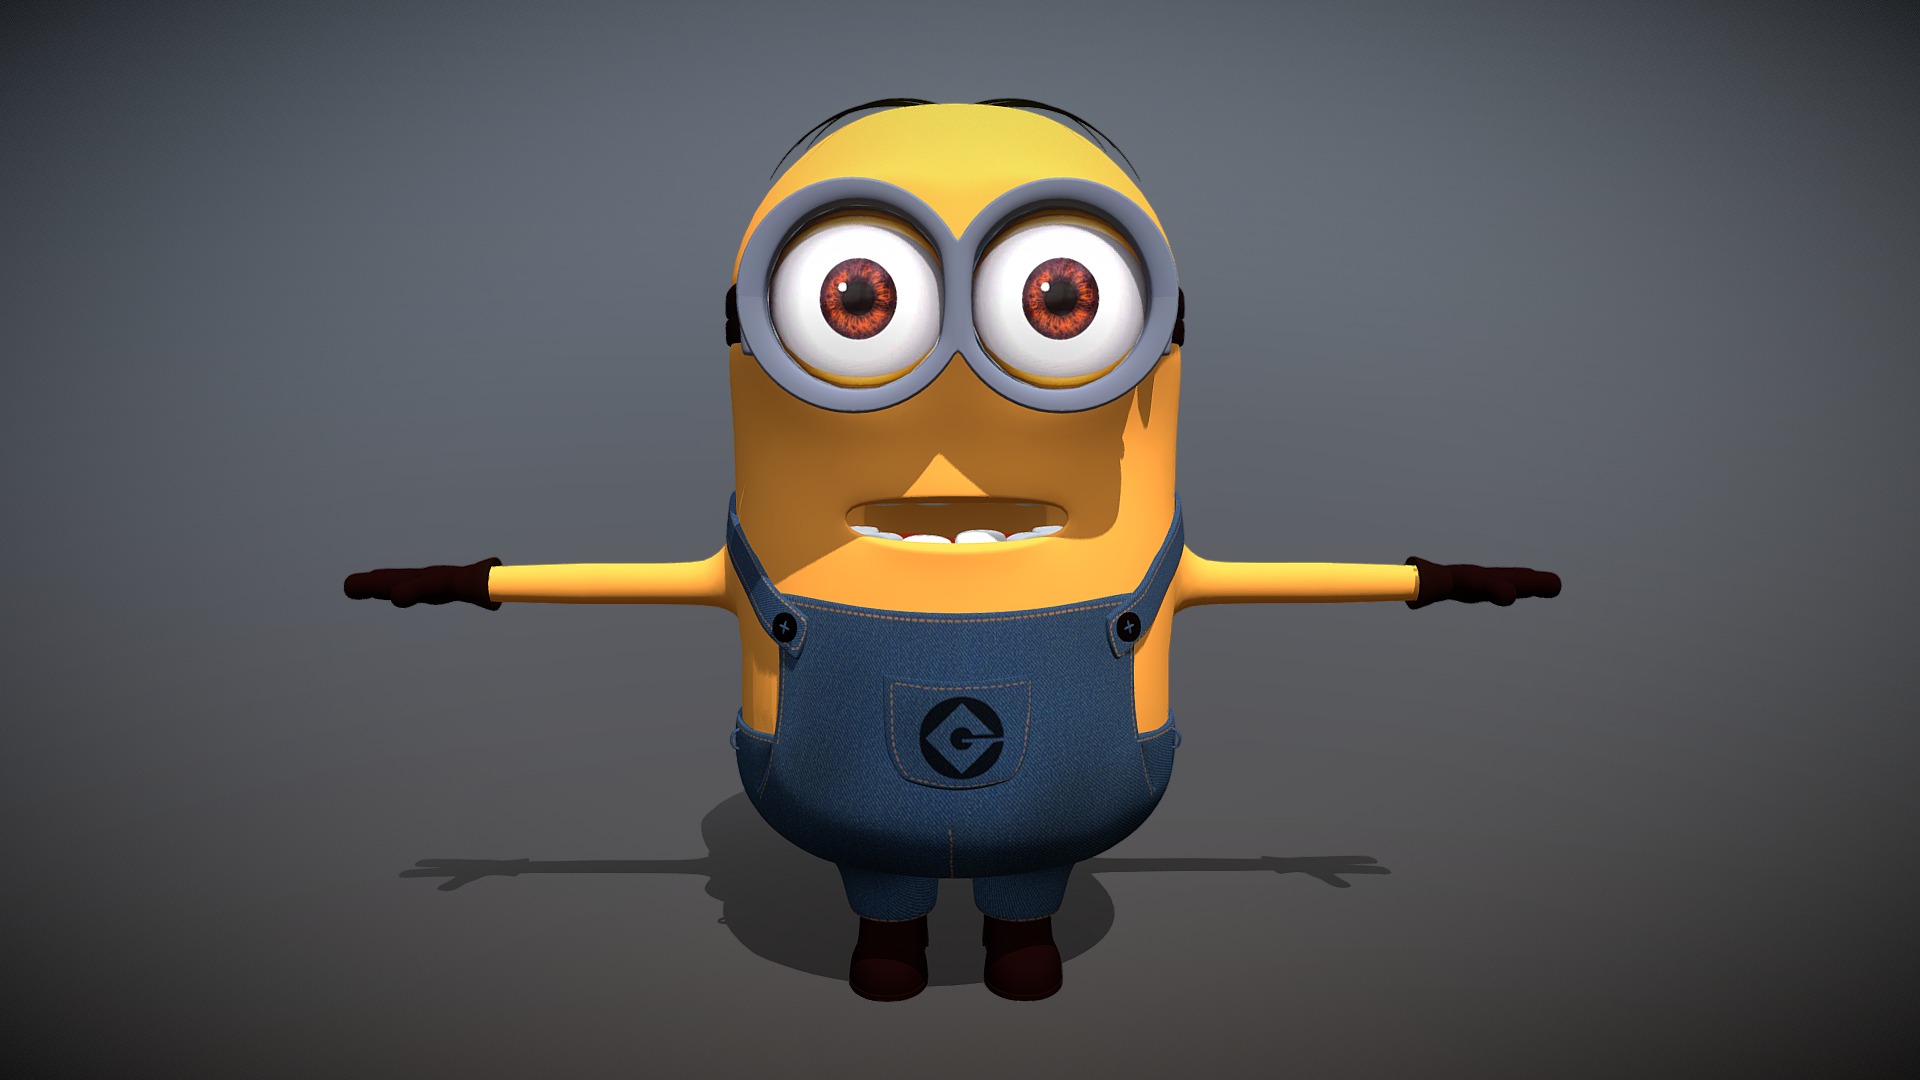 3D model Minions_01 - This is a 3D model of the Minions_01. The 3D model is about a toy figure with a yellow and blue body suit.